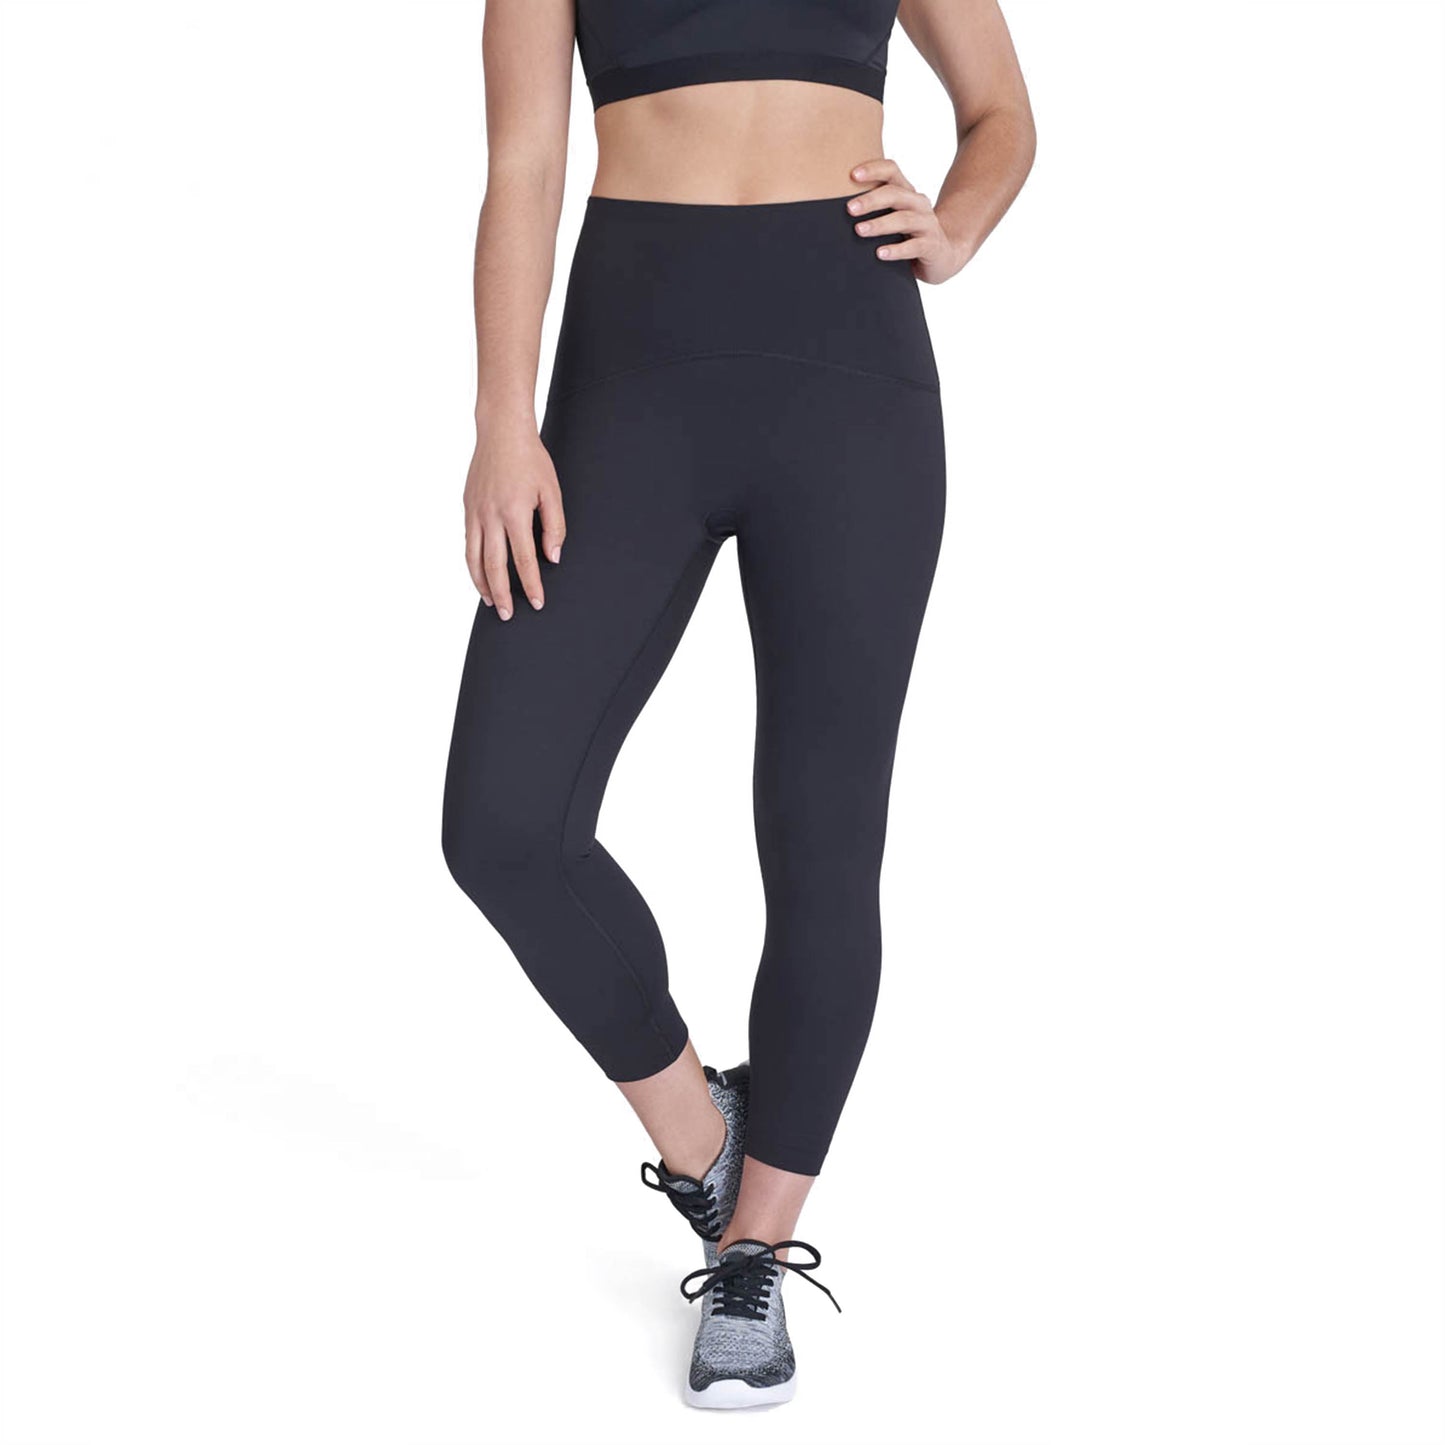 Spanx's Contour Rib Collection Is Our Newest Activewear Obsession